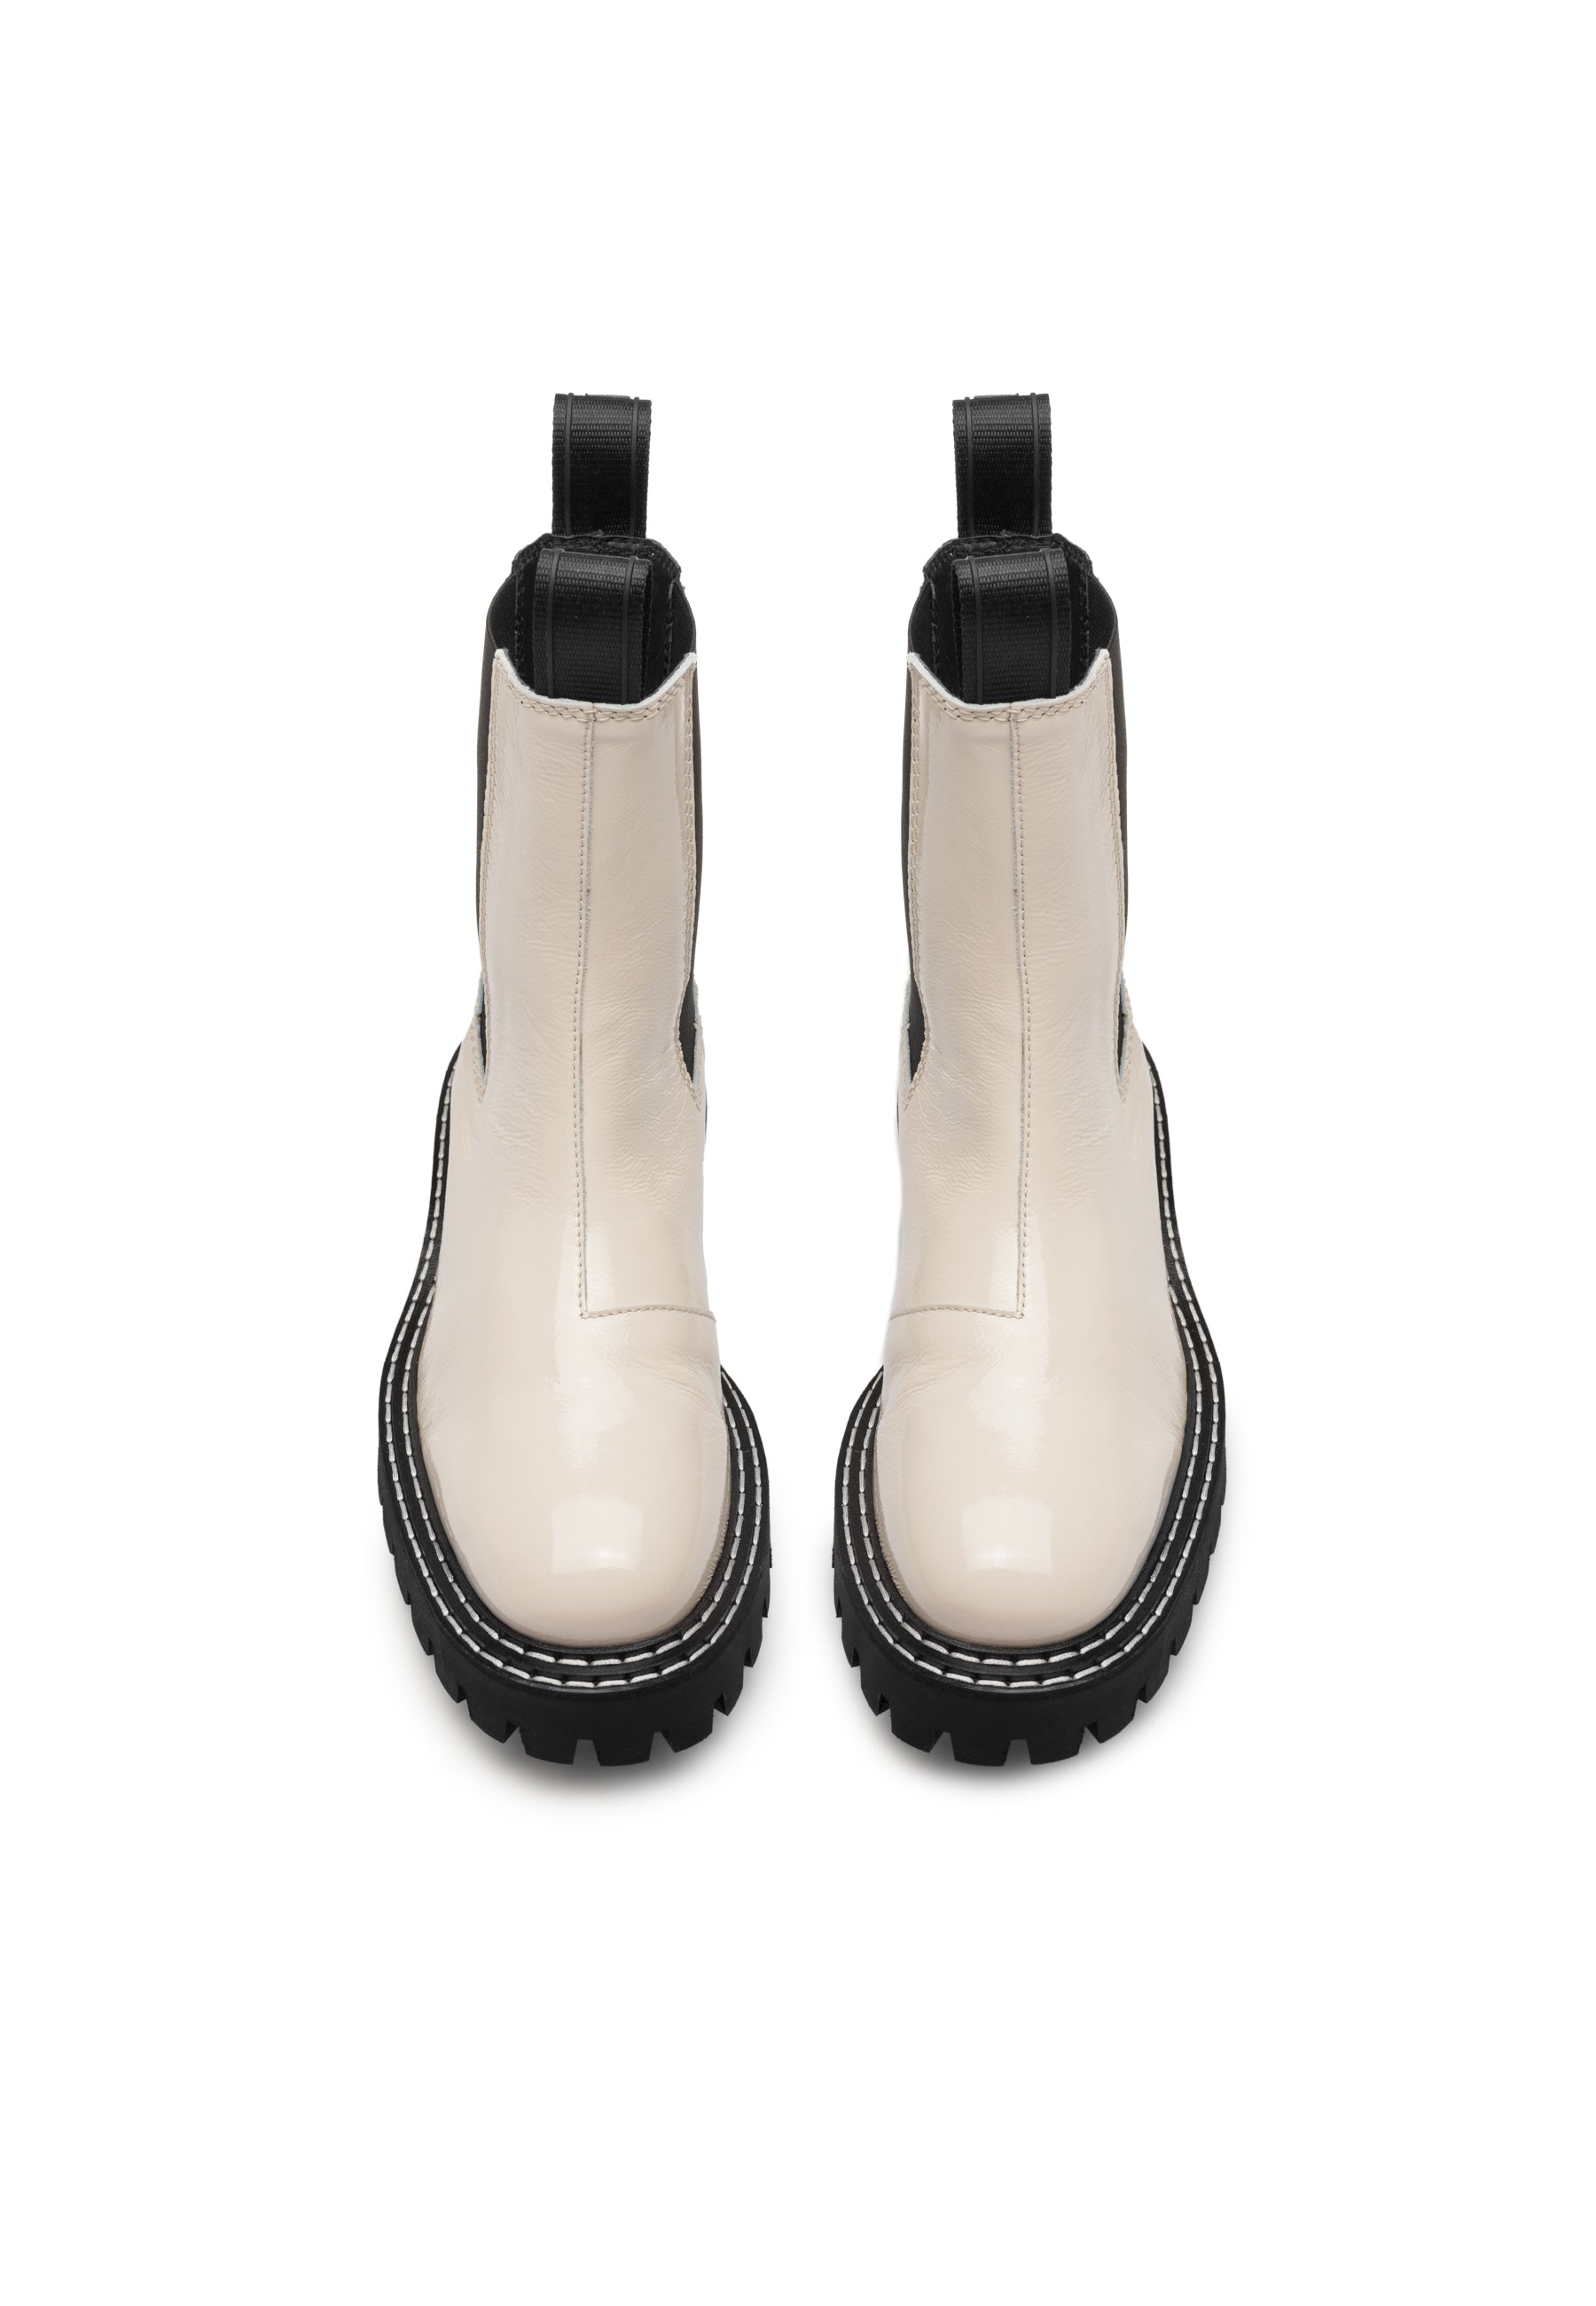 Daze Off White Patent Leather Chelsea Boots LAST1678 - 3